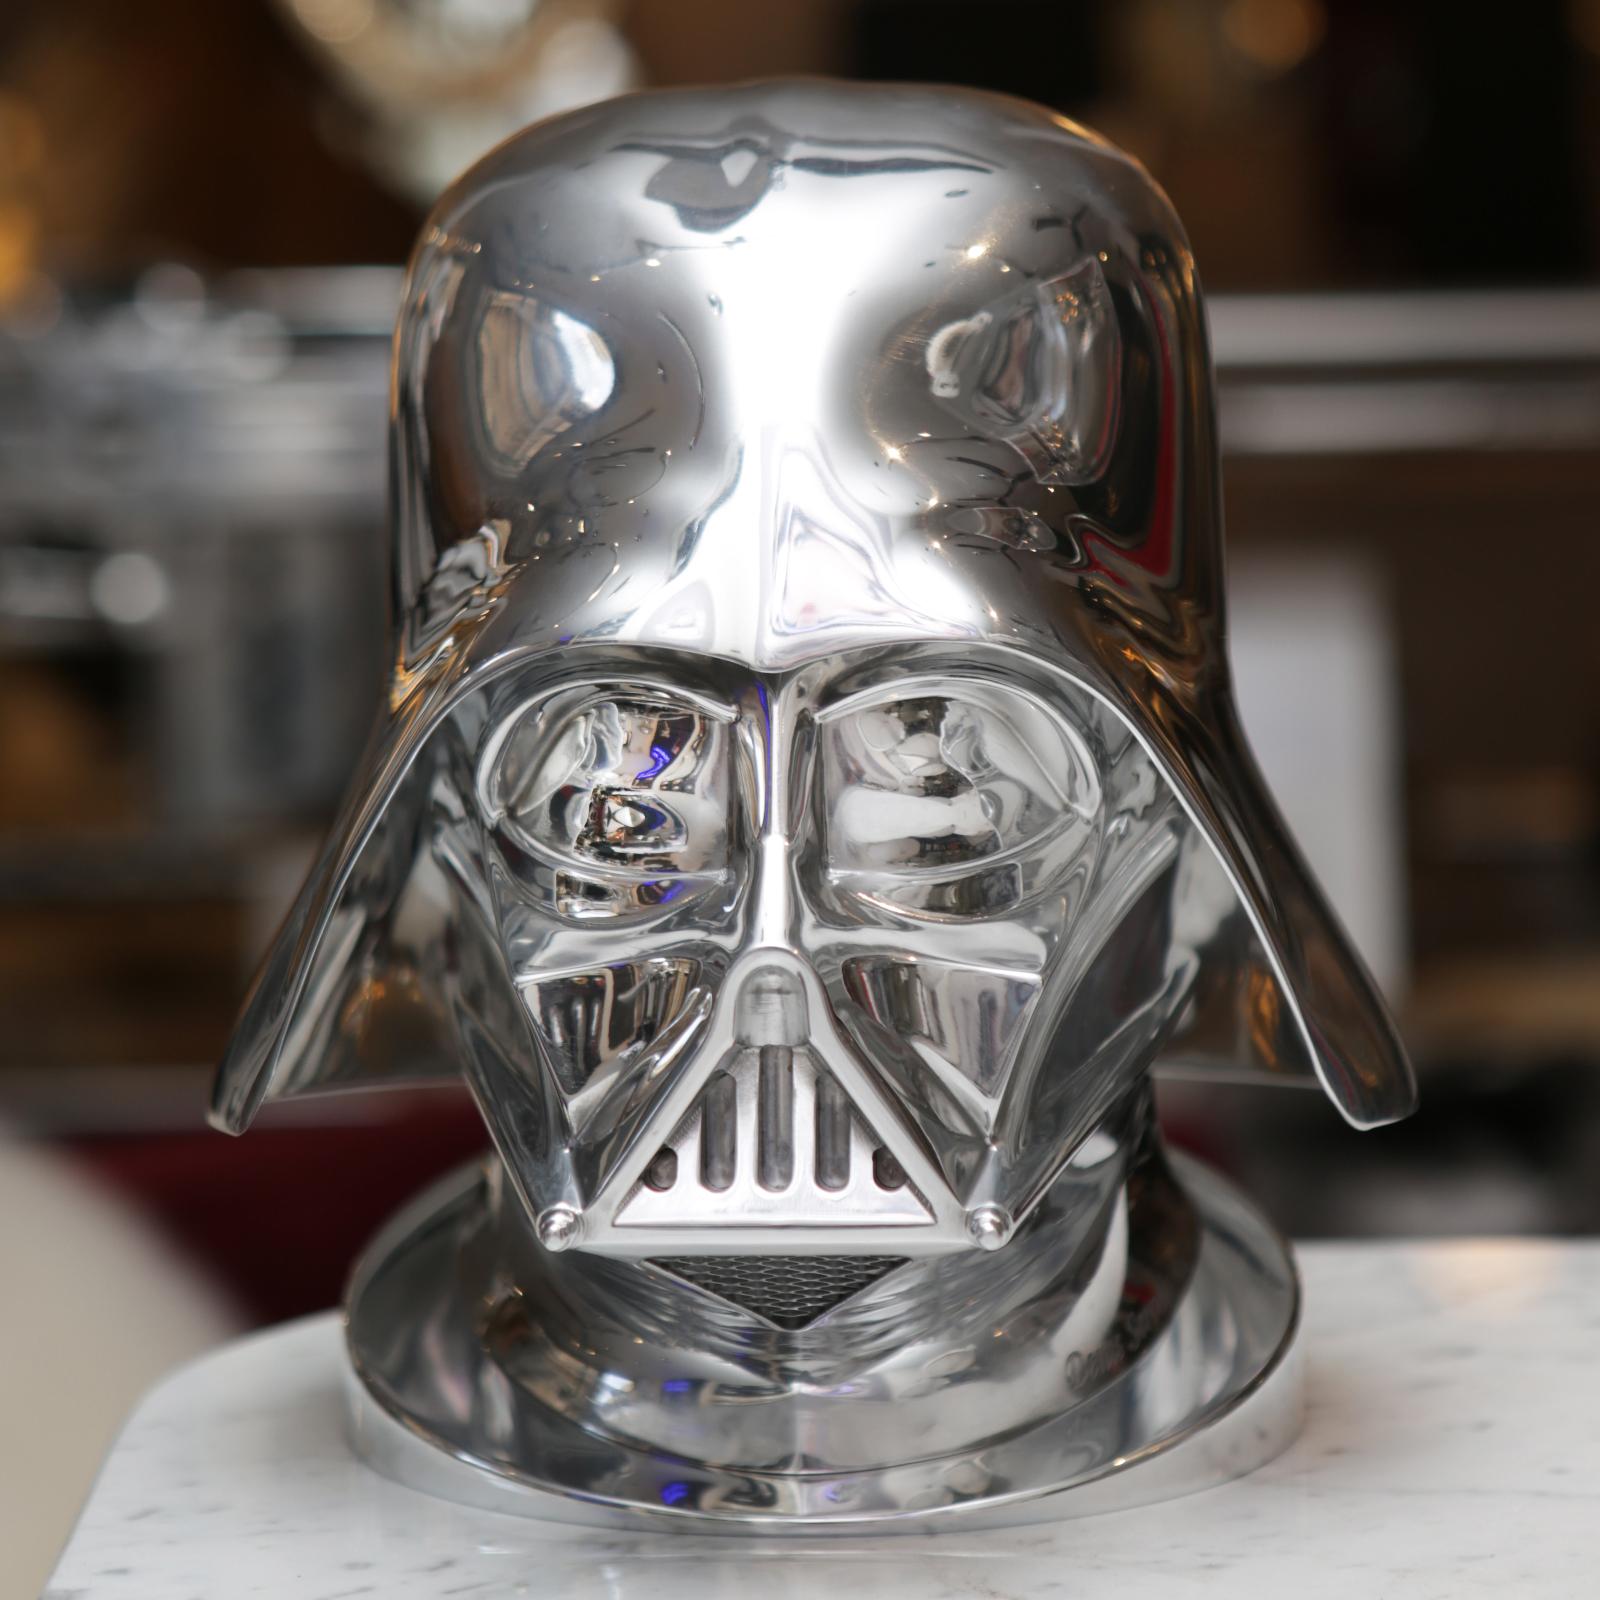 Sculpture dark vador helmet made in full
solid polished aluminum, numeroted piece
02/20 made in France in 2019.